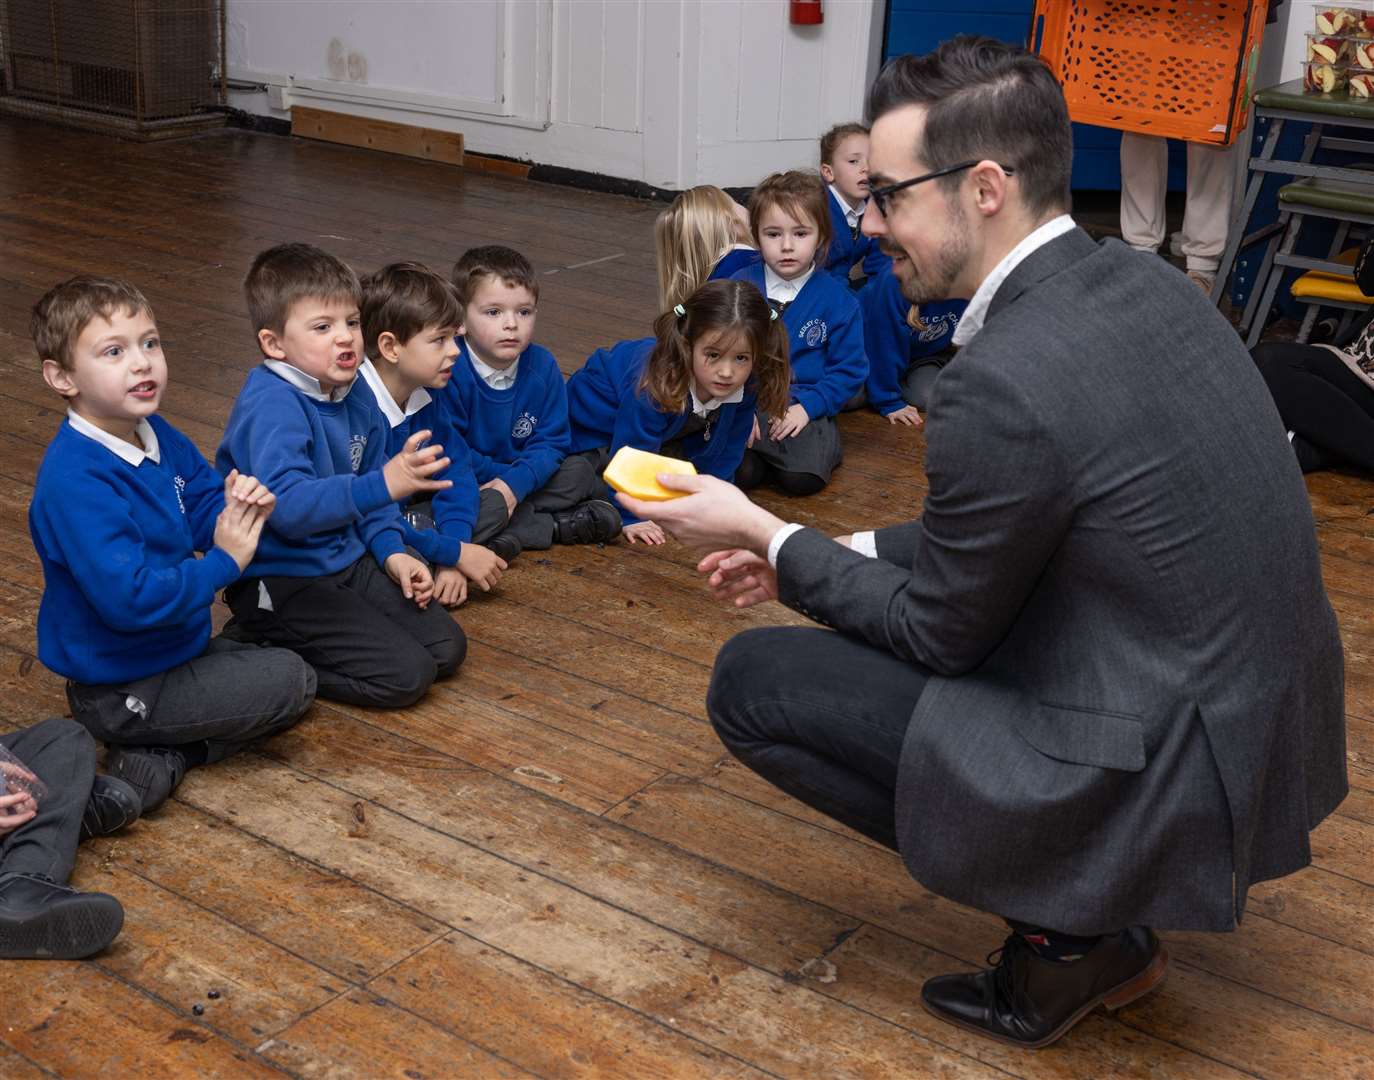 Prepworld's Alberto Moreda chats to youngsters at Sedley's Church of England Primary School in Southfleet